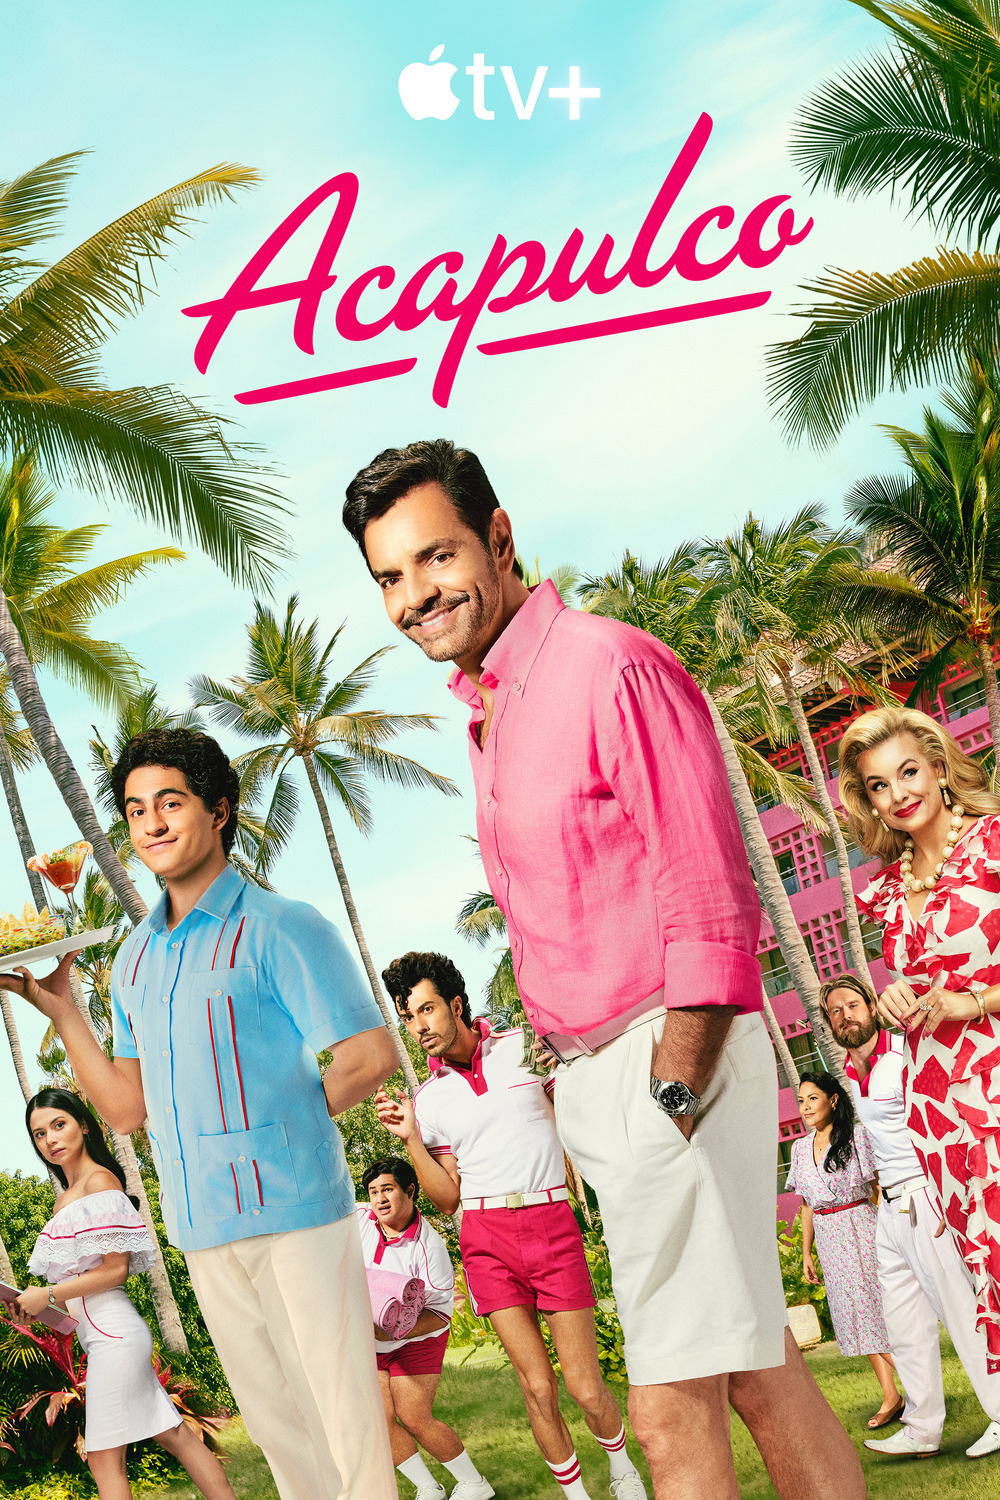 Extra Large TV Poster Image for Acapulco (#3 of 3)